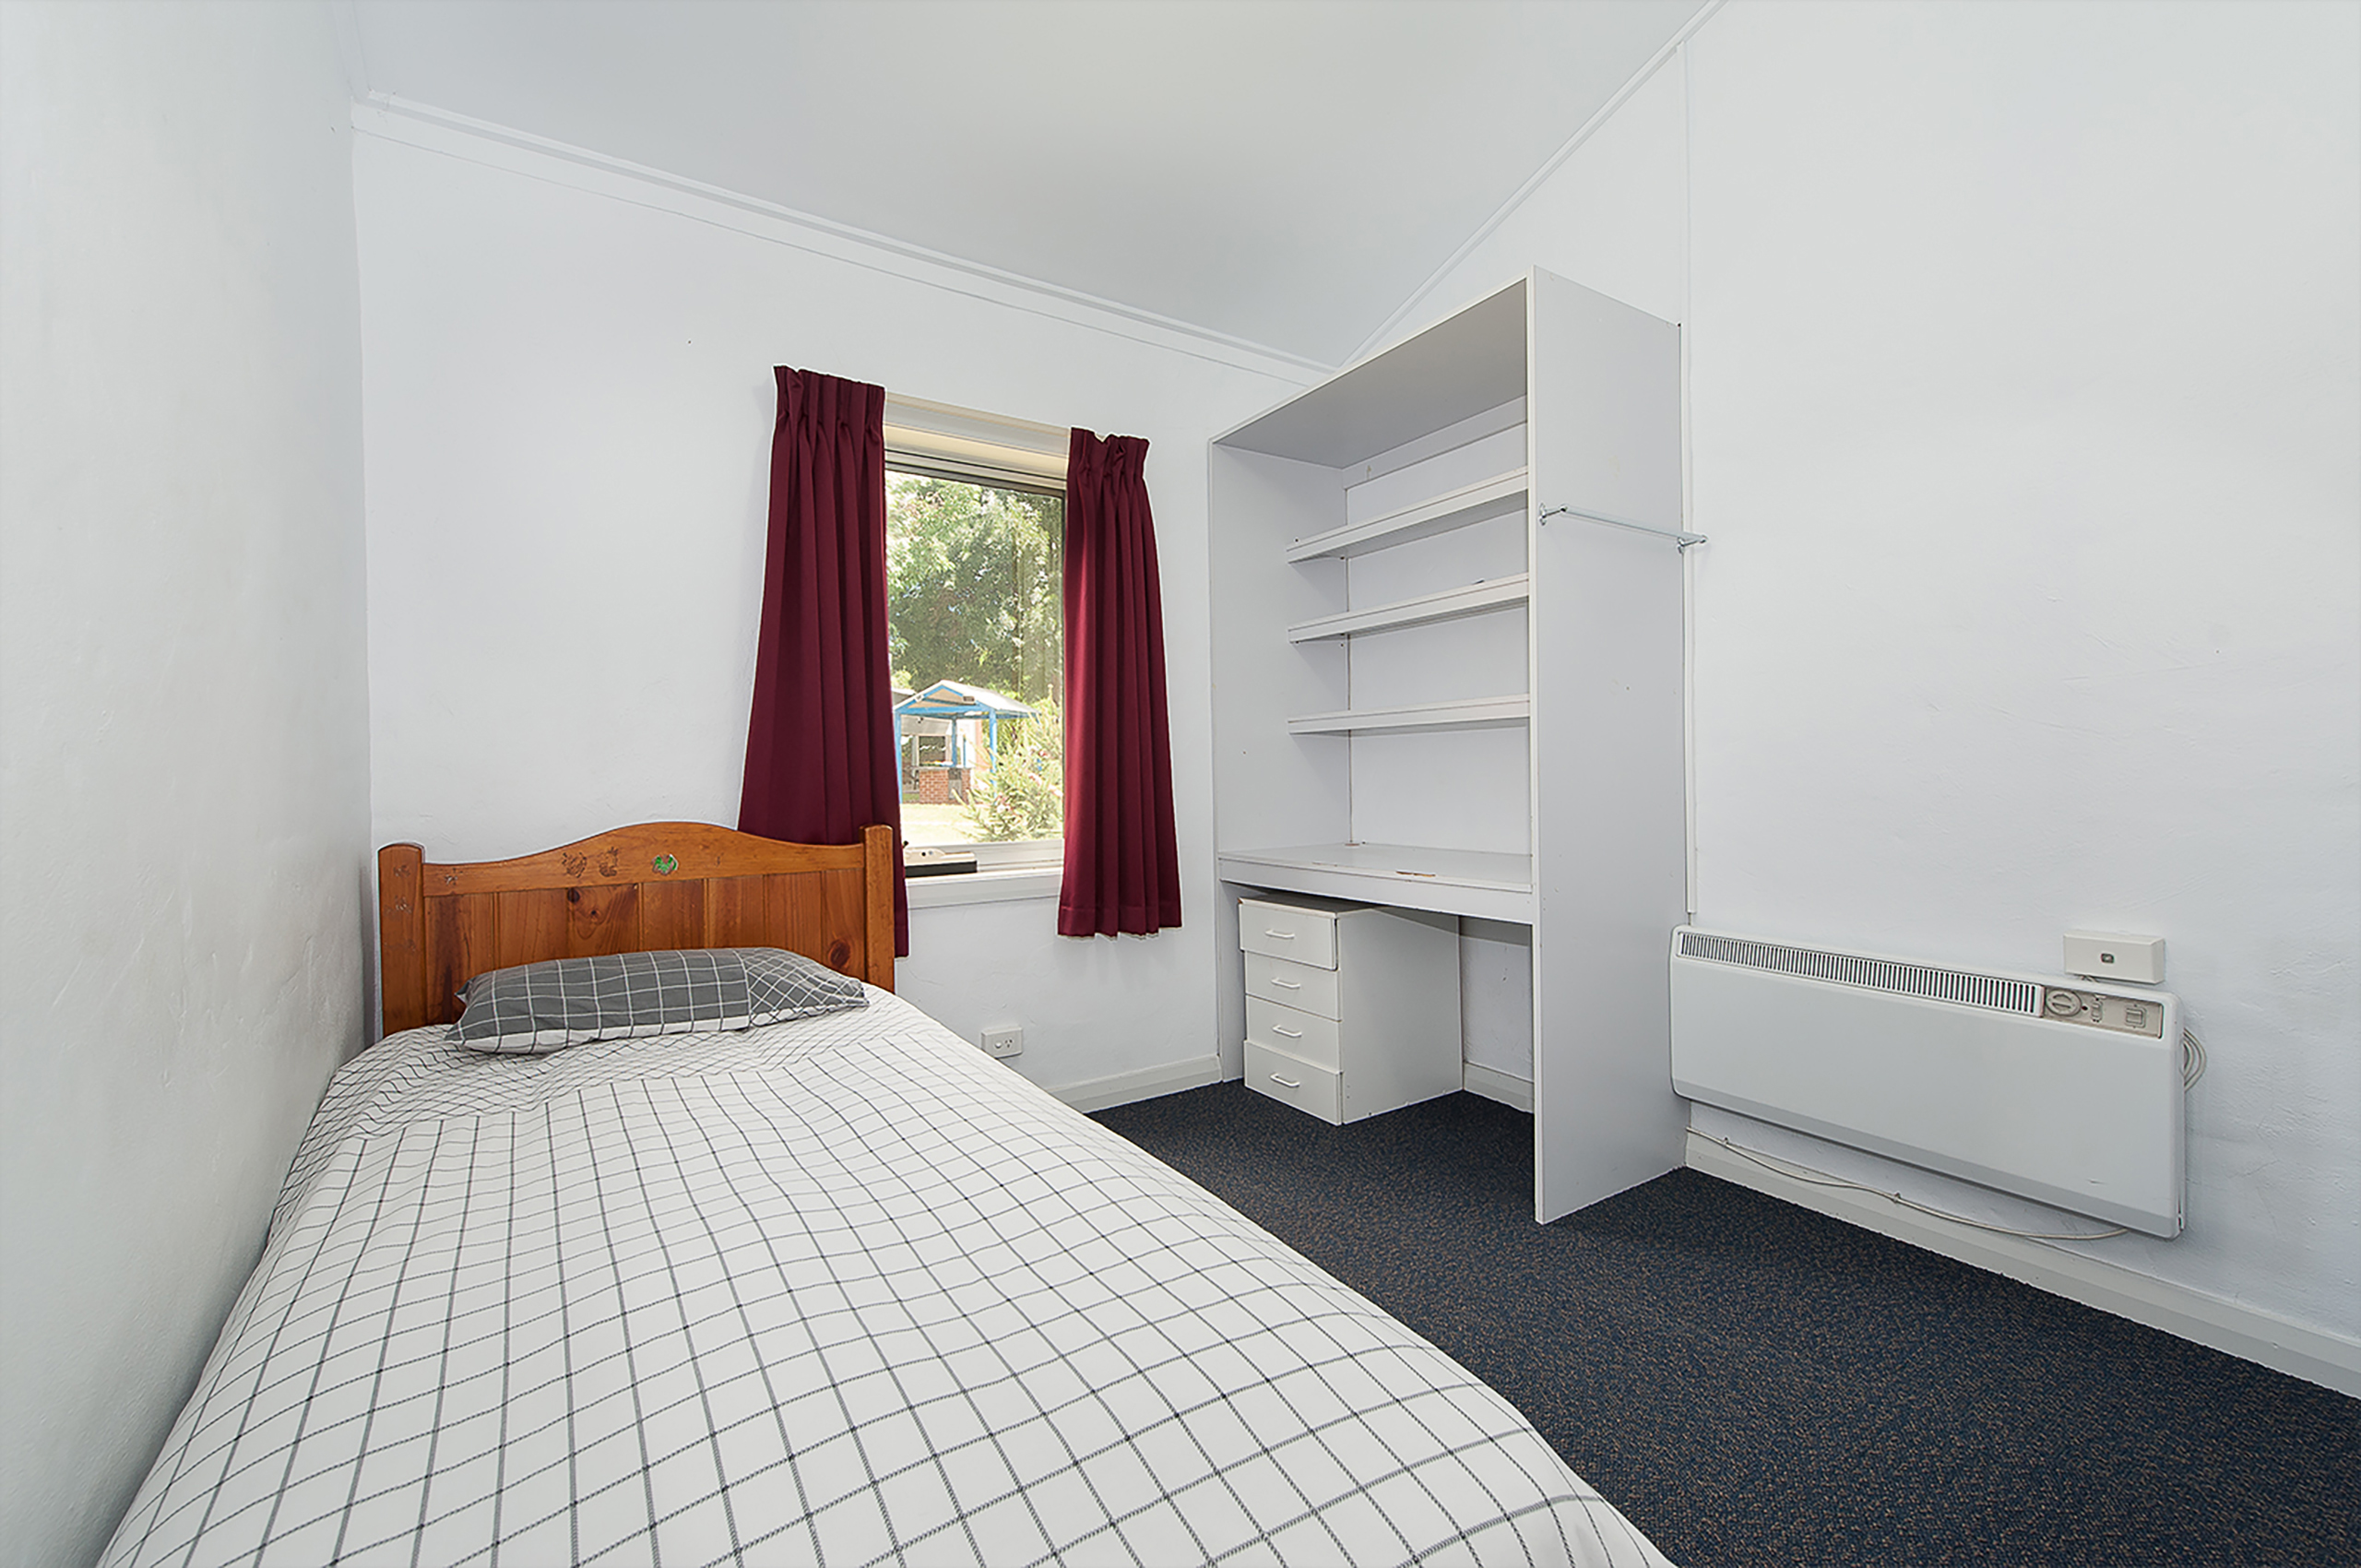 Single bed student accommodation with a heater, shelves and drawers.